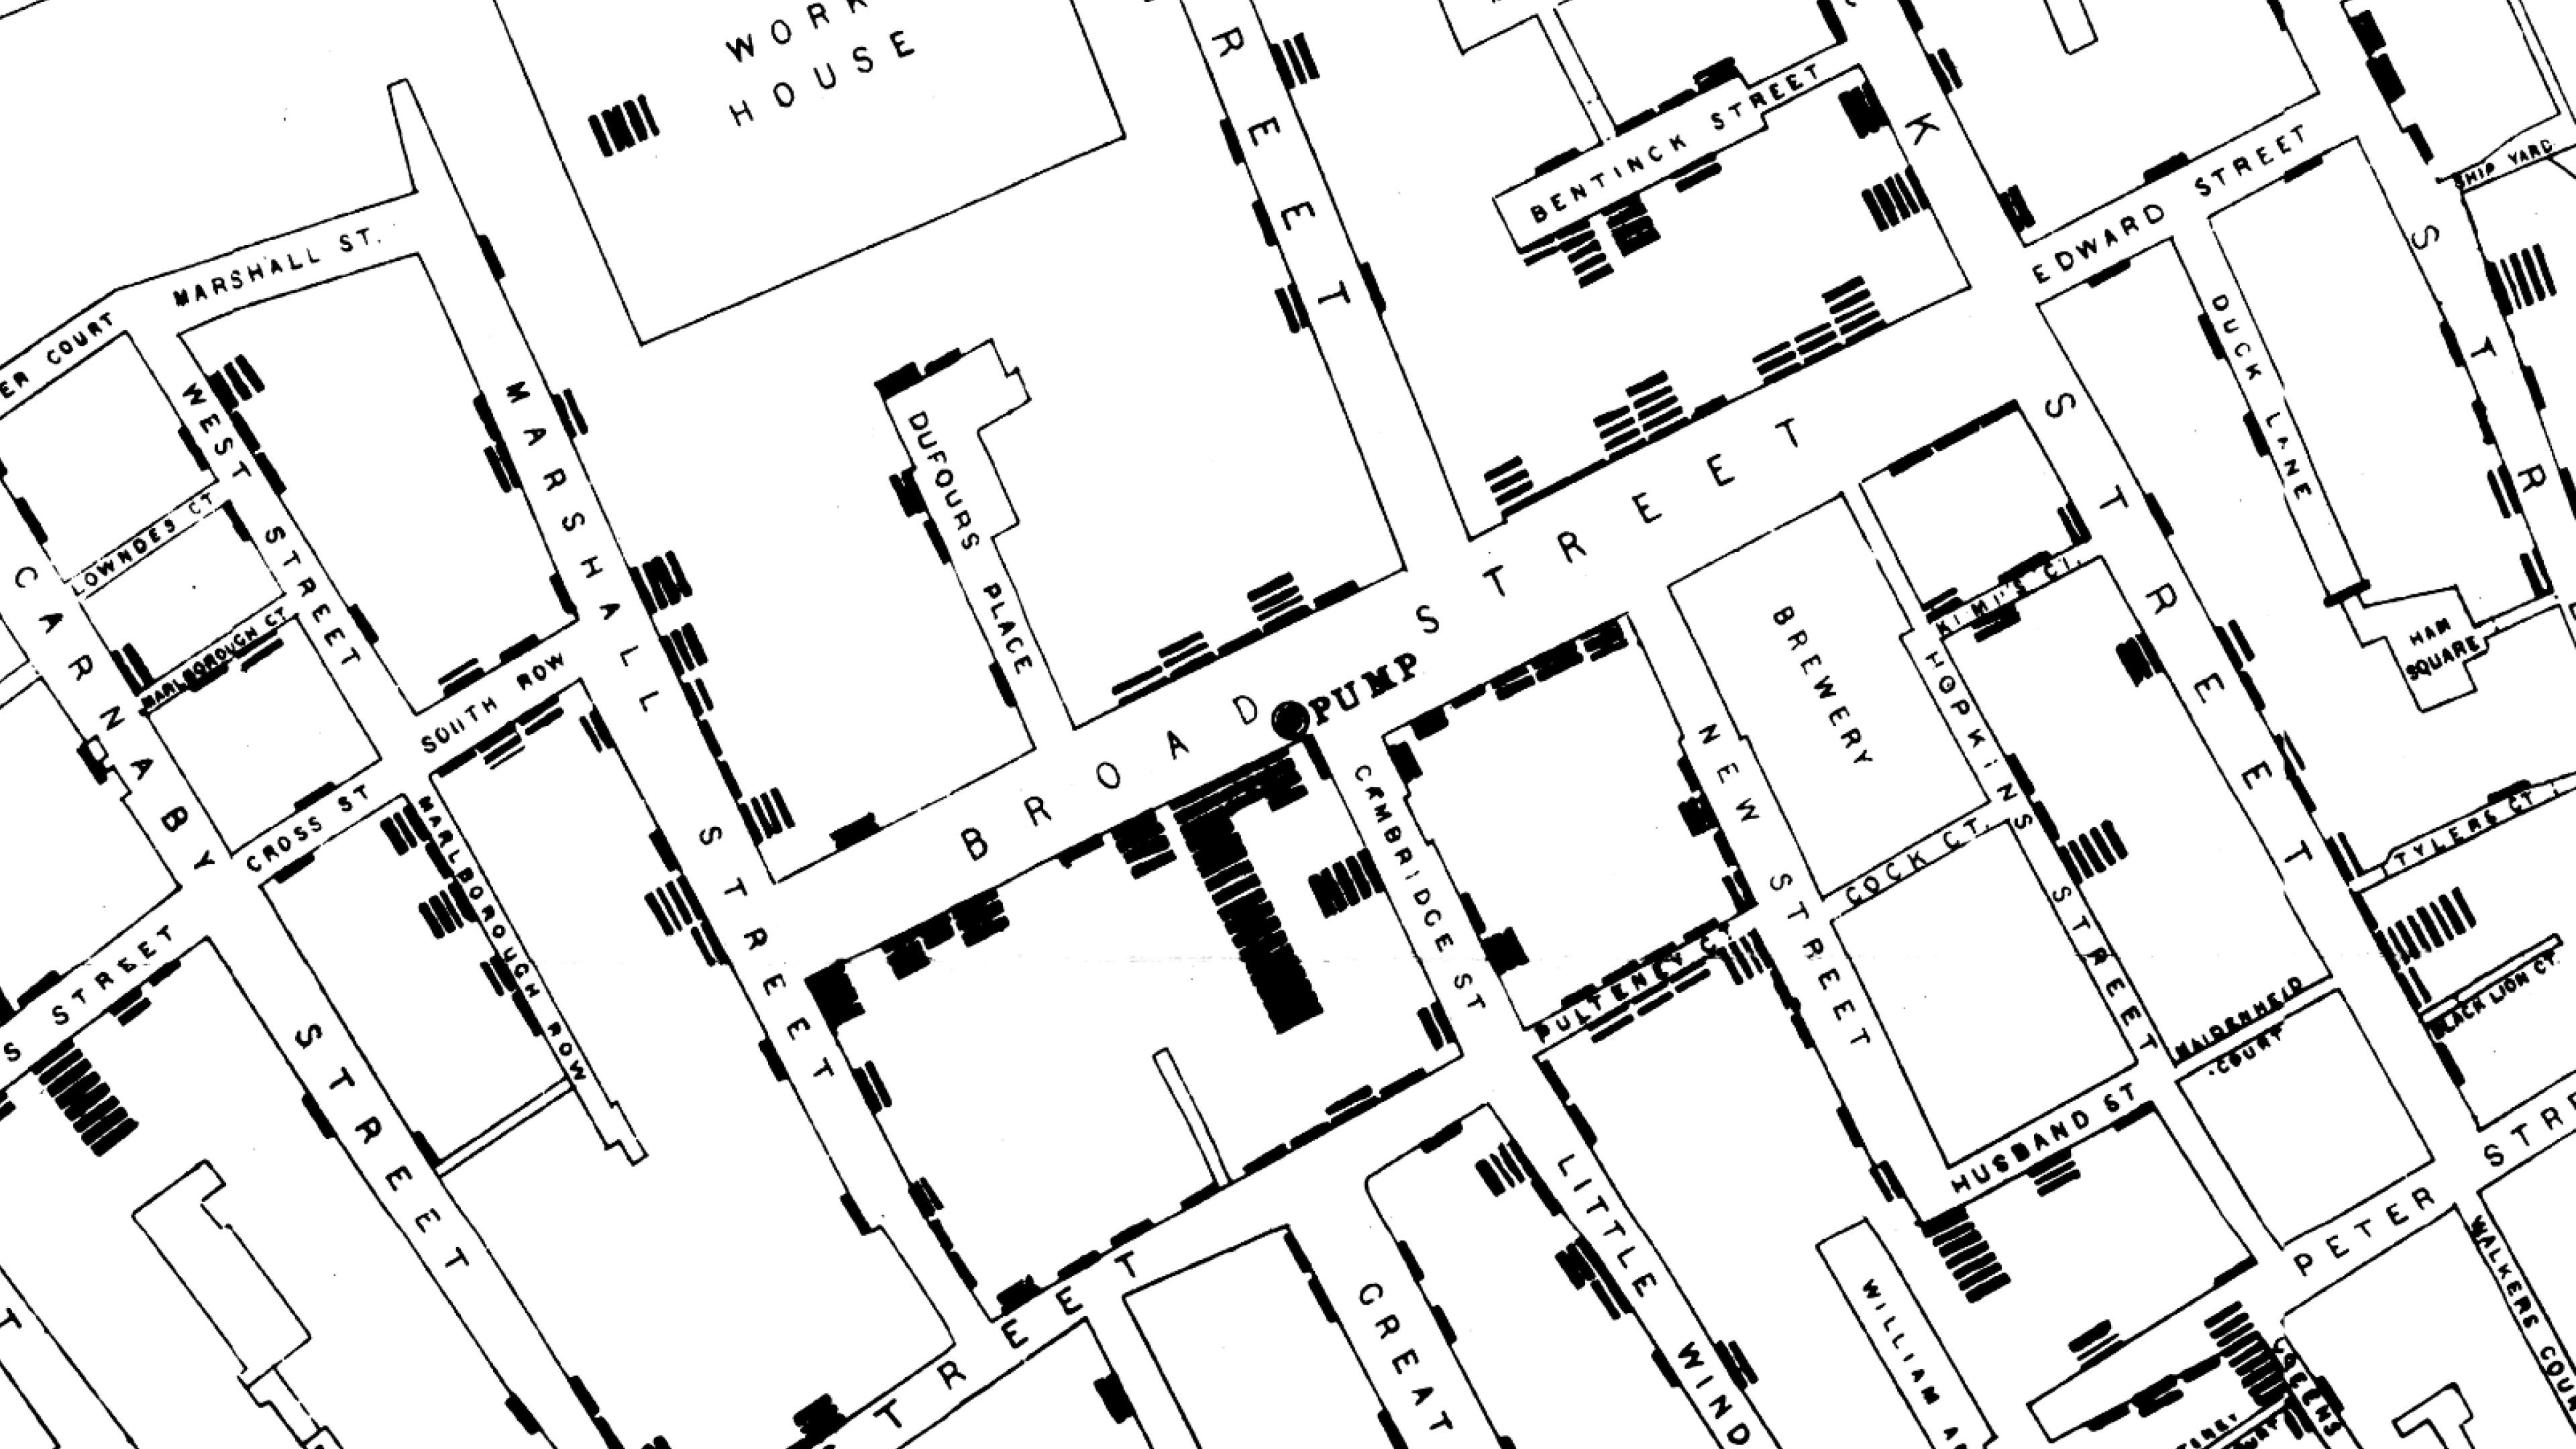 John Snow’s dot map showing the location of deaths around the Broad Street pump